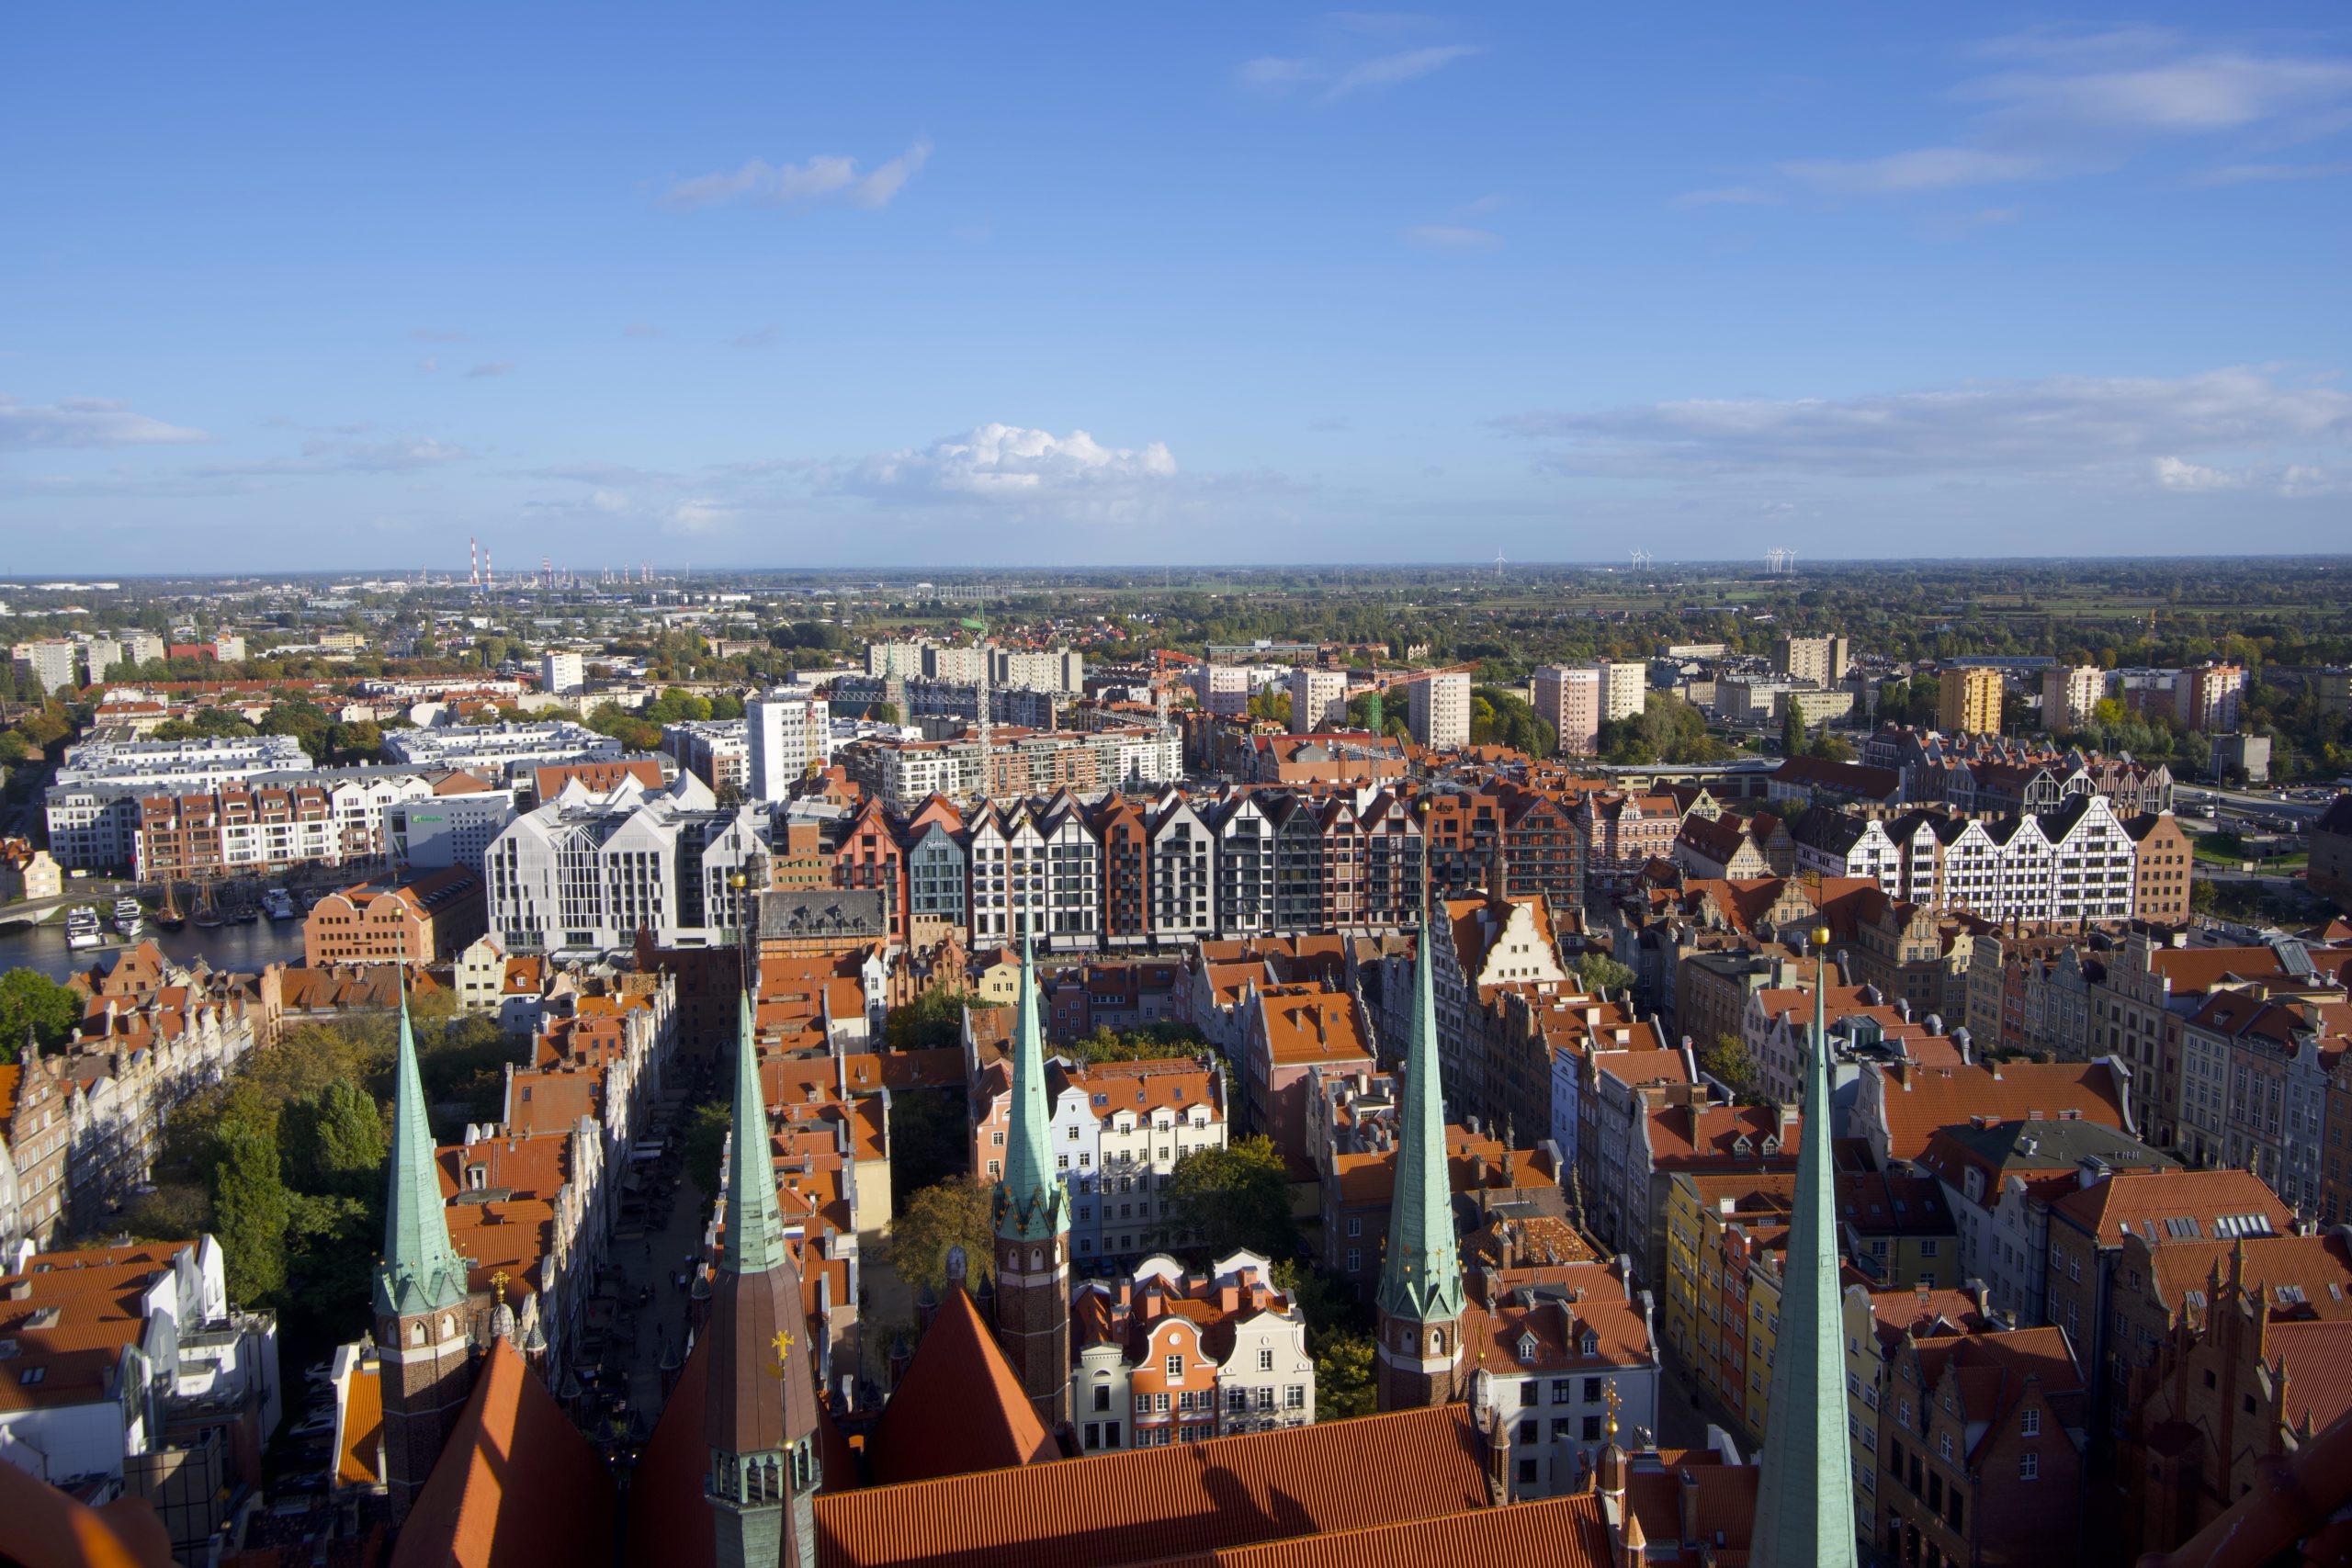 An epic view of the Gdansk city from the top of Saint Mary's church